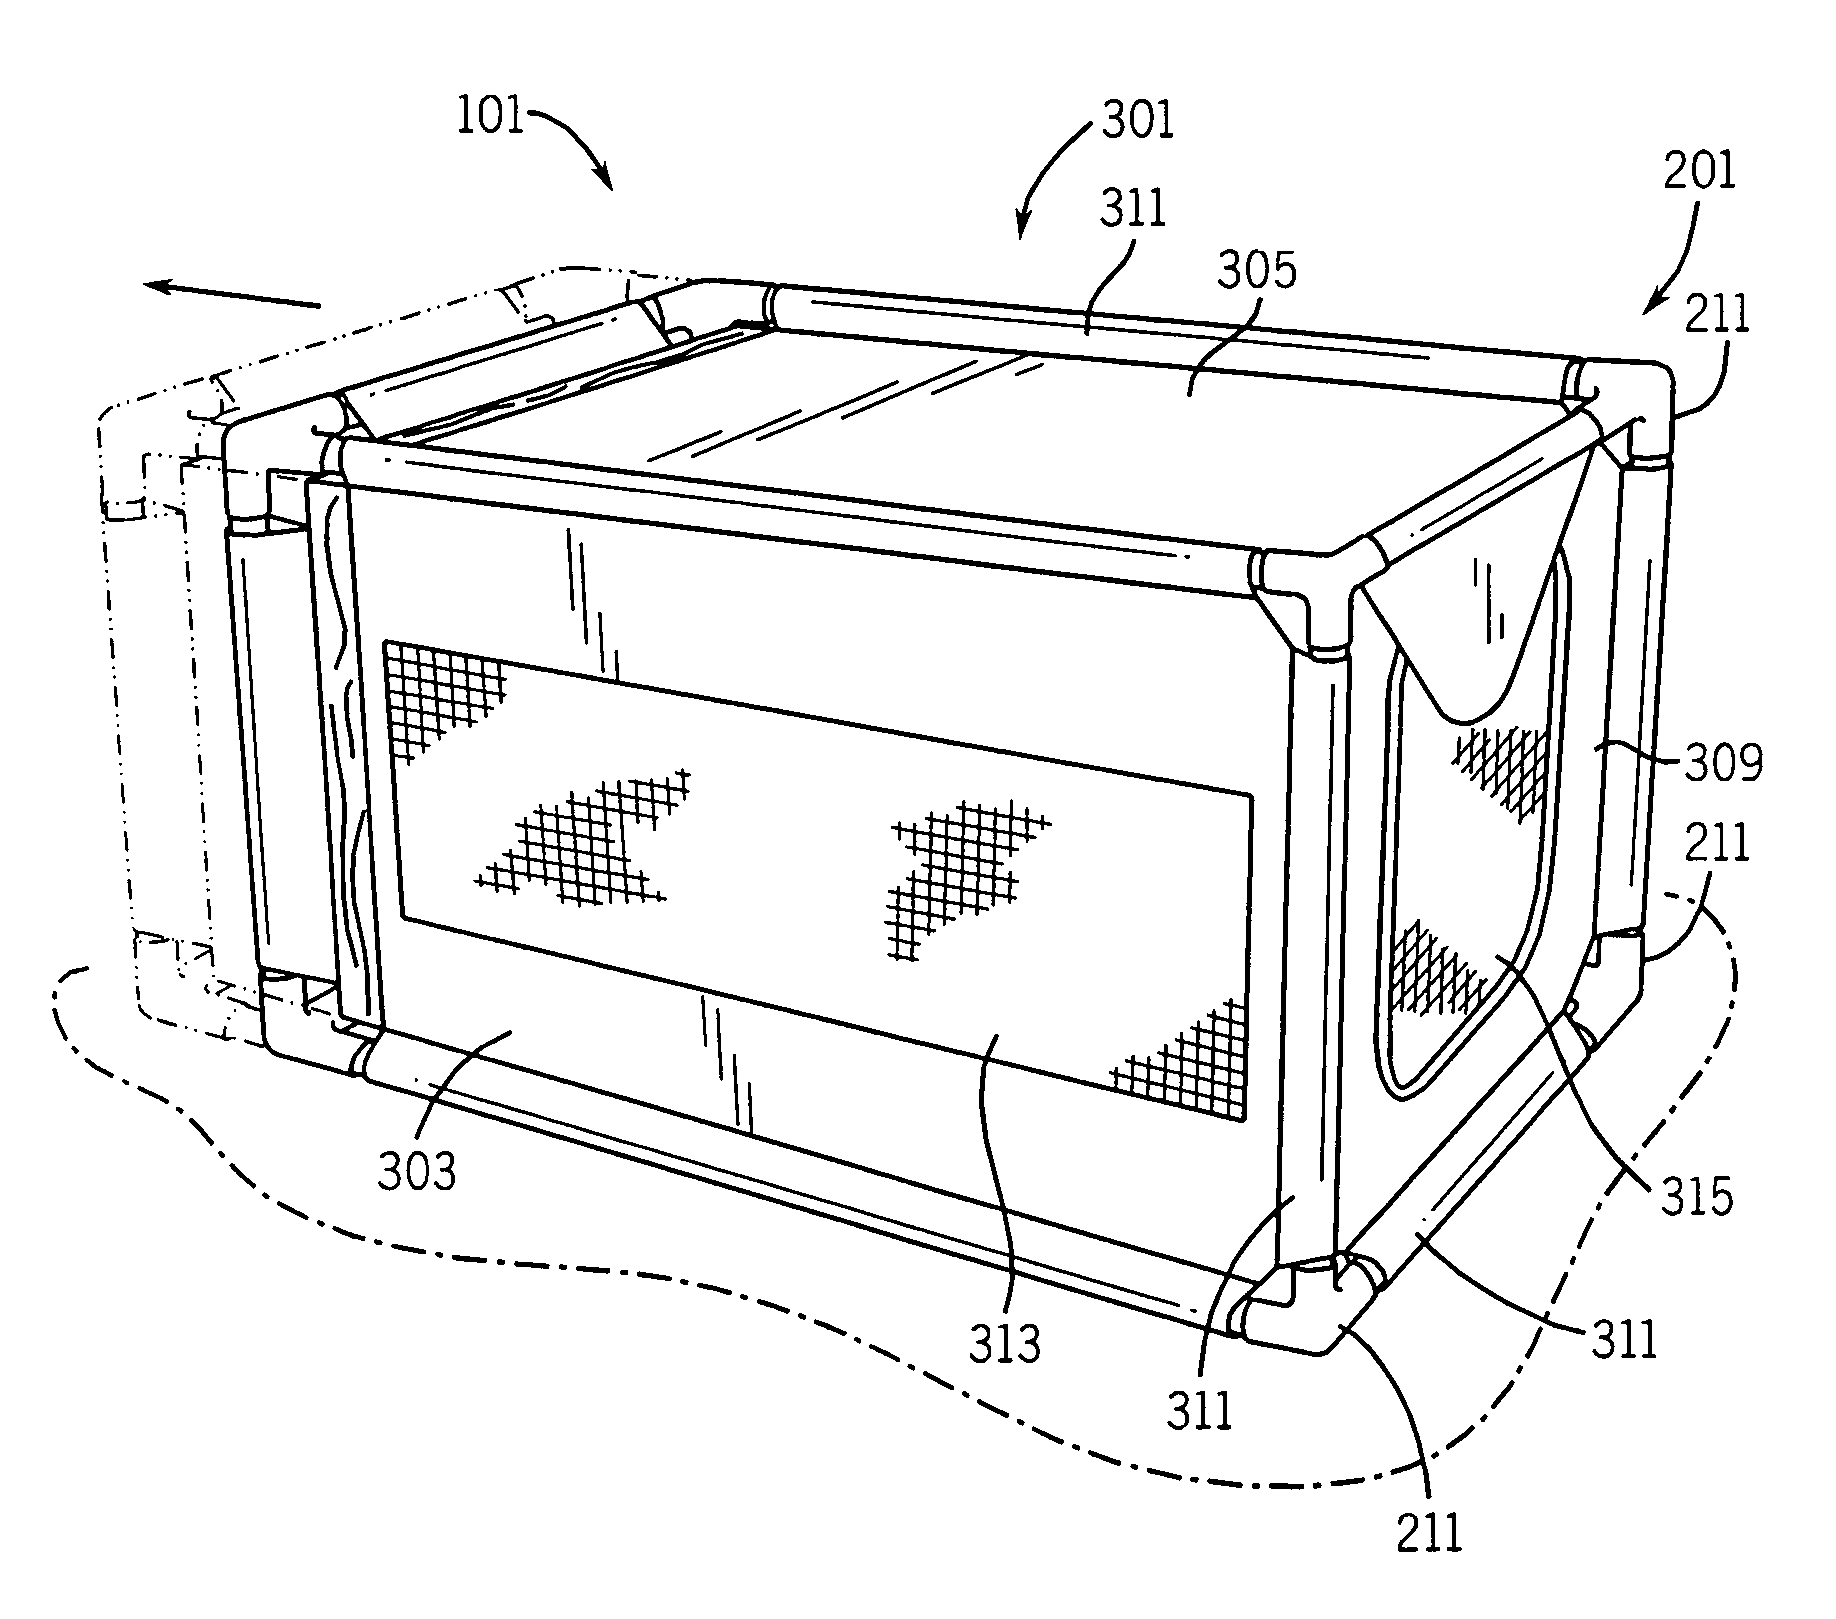 Expandable animal kennel